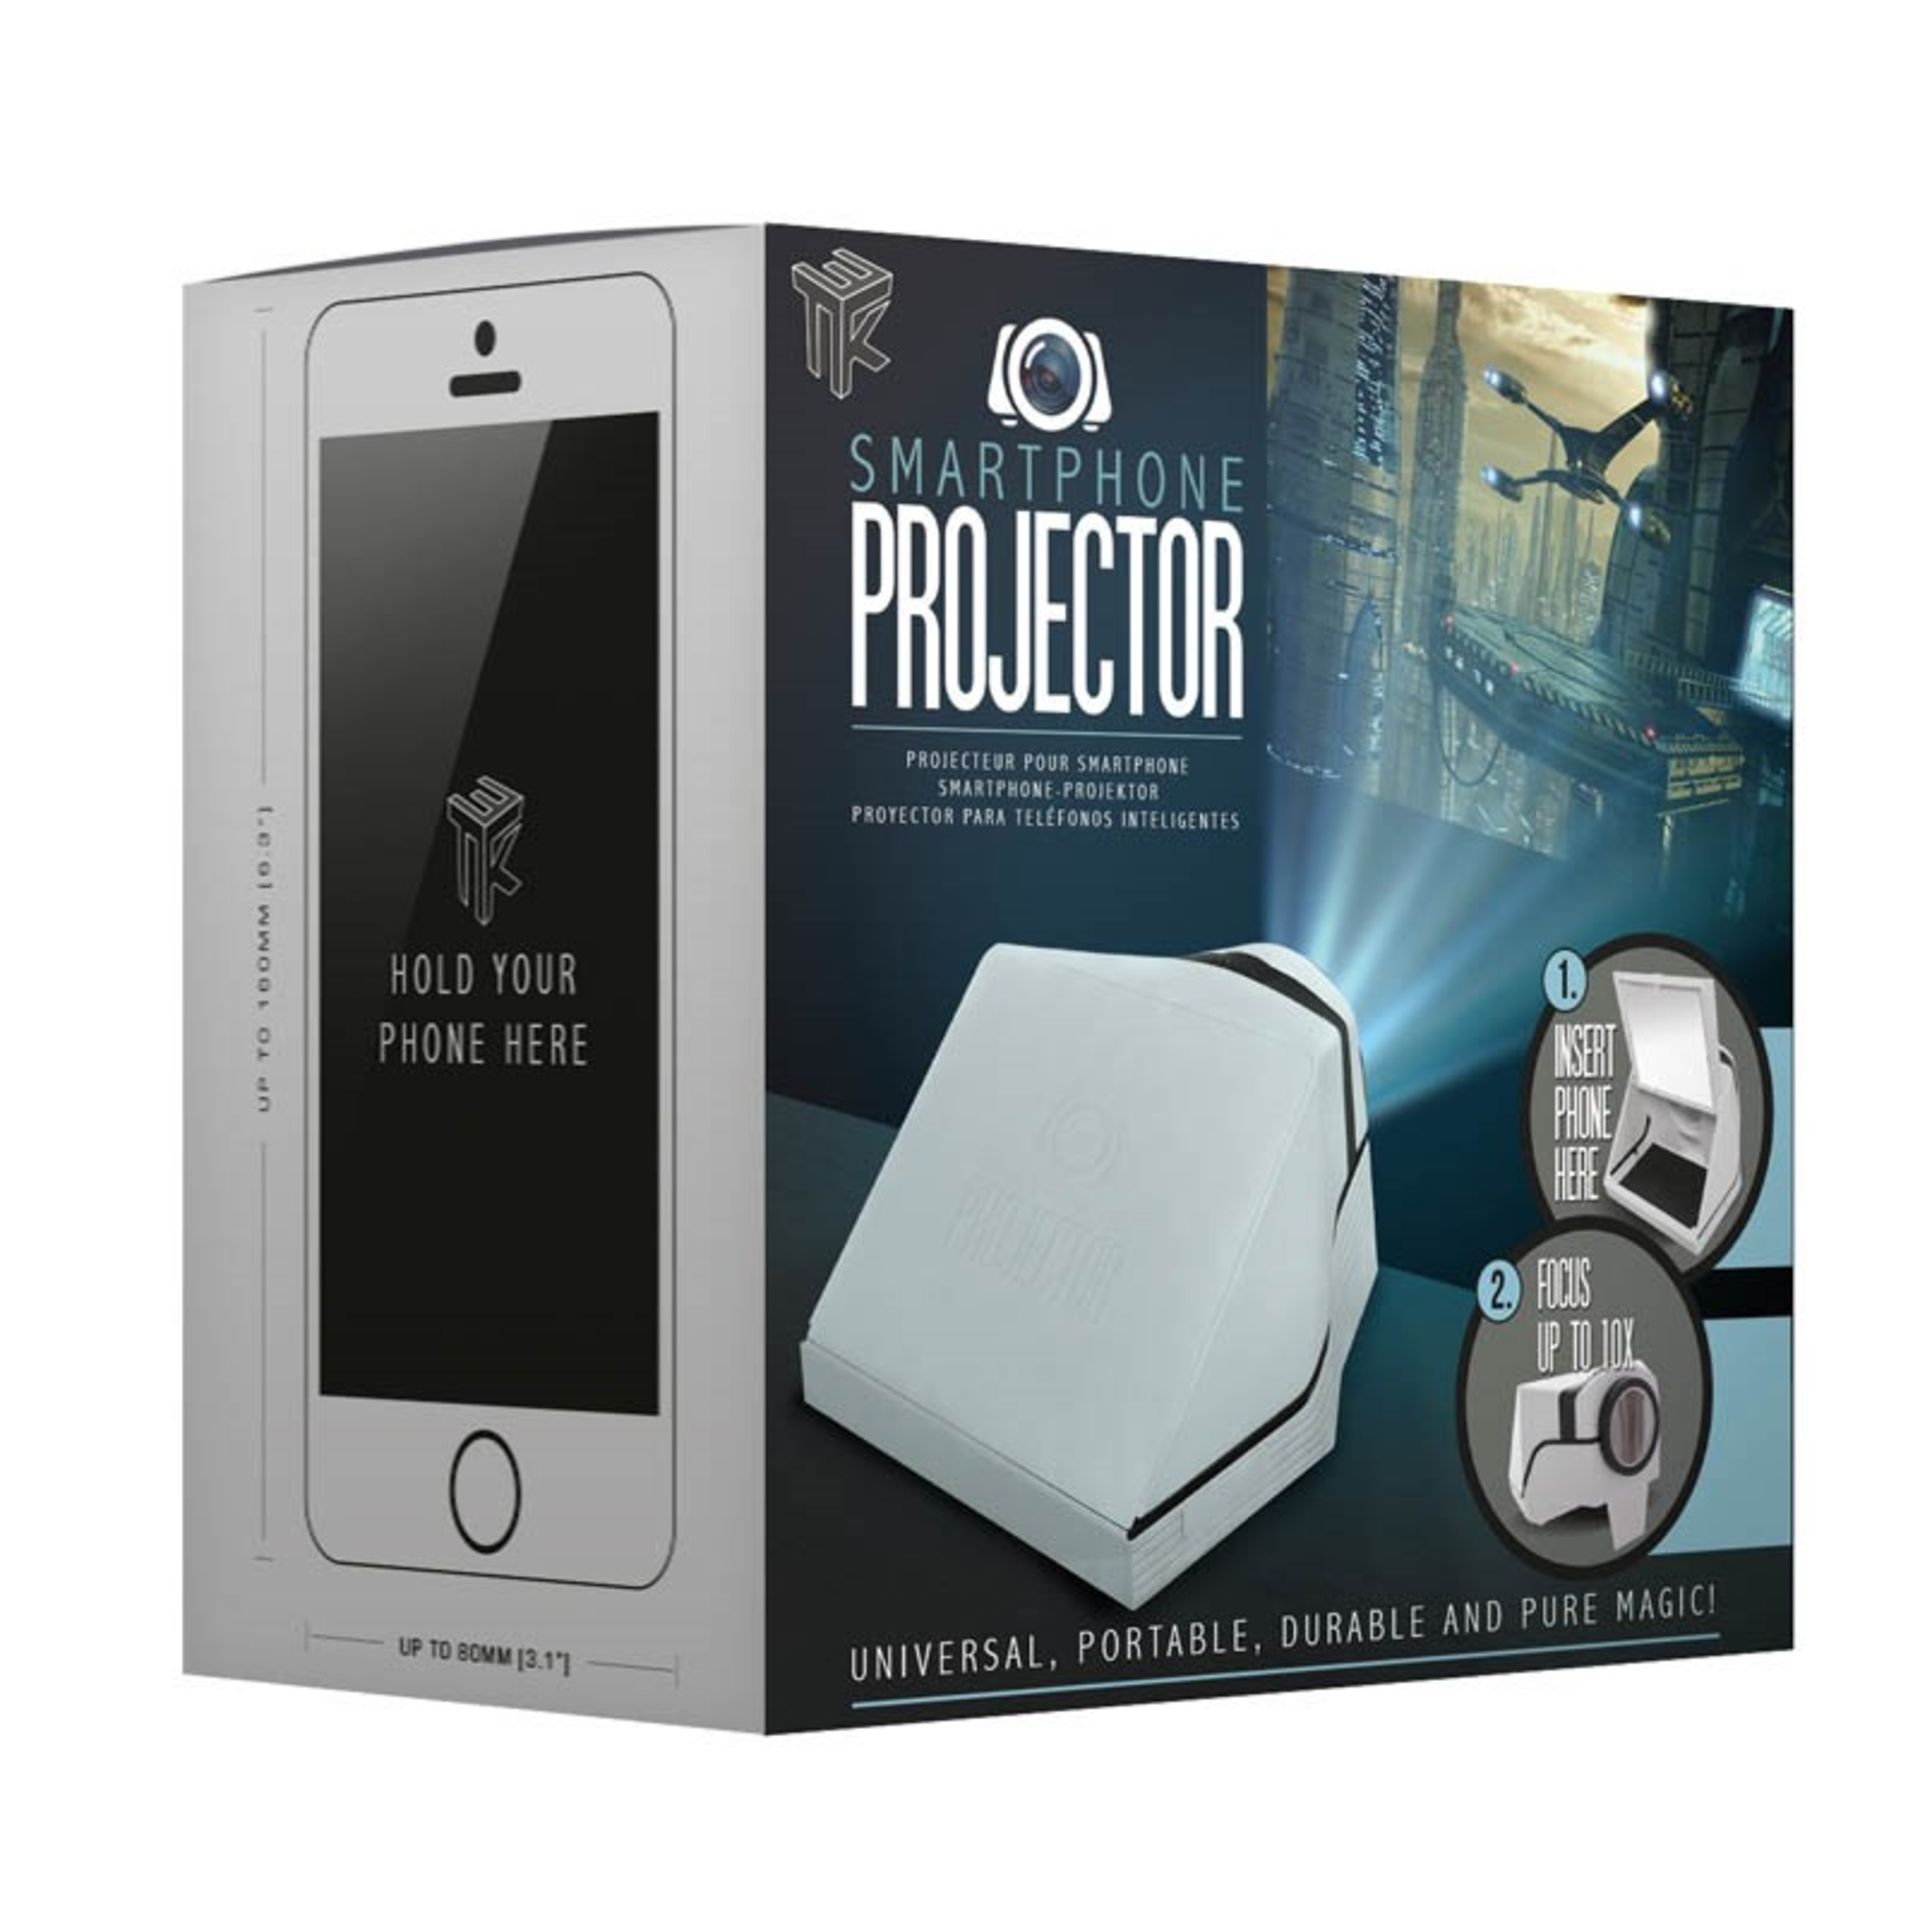 V Brand New Smartphone Projector - Projects 40" Screen - Focus Up To 10x - ISP £19.99 (Paladone) - Image 3 of 3